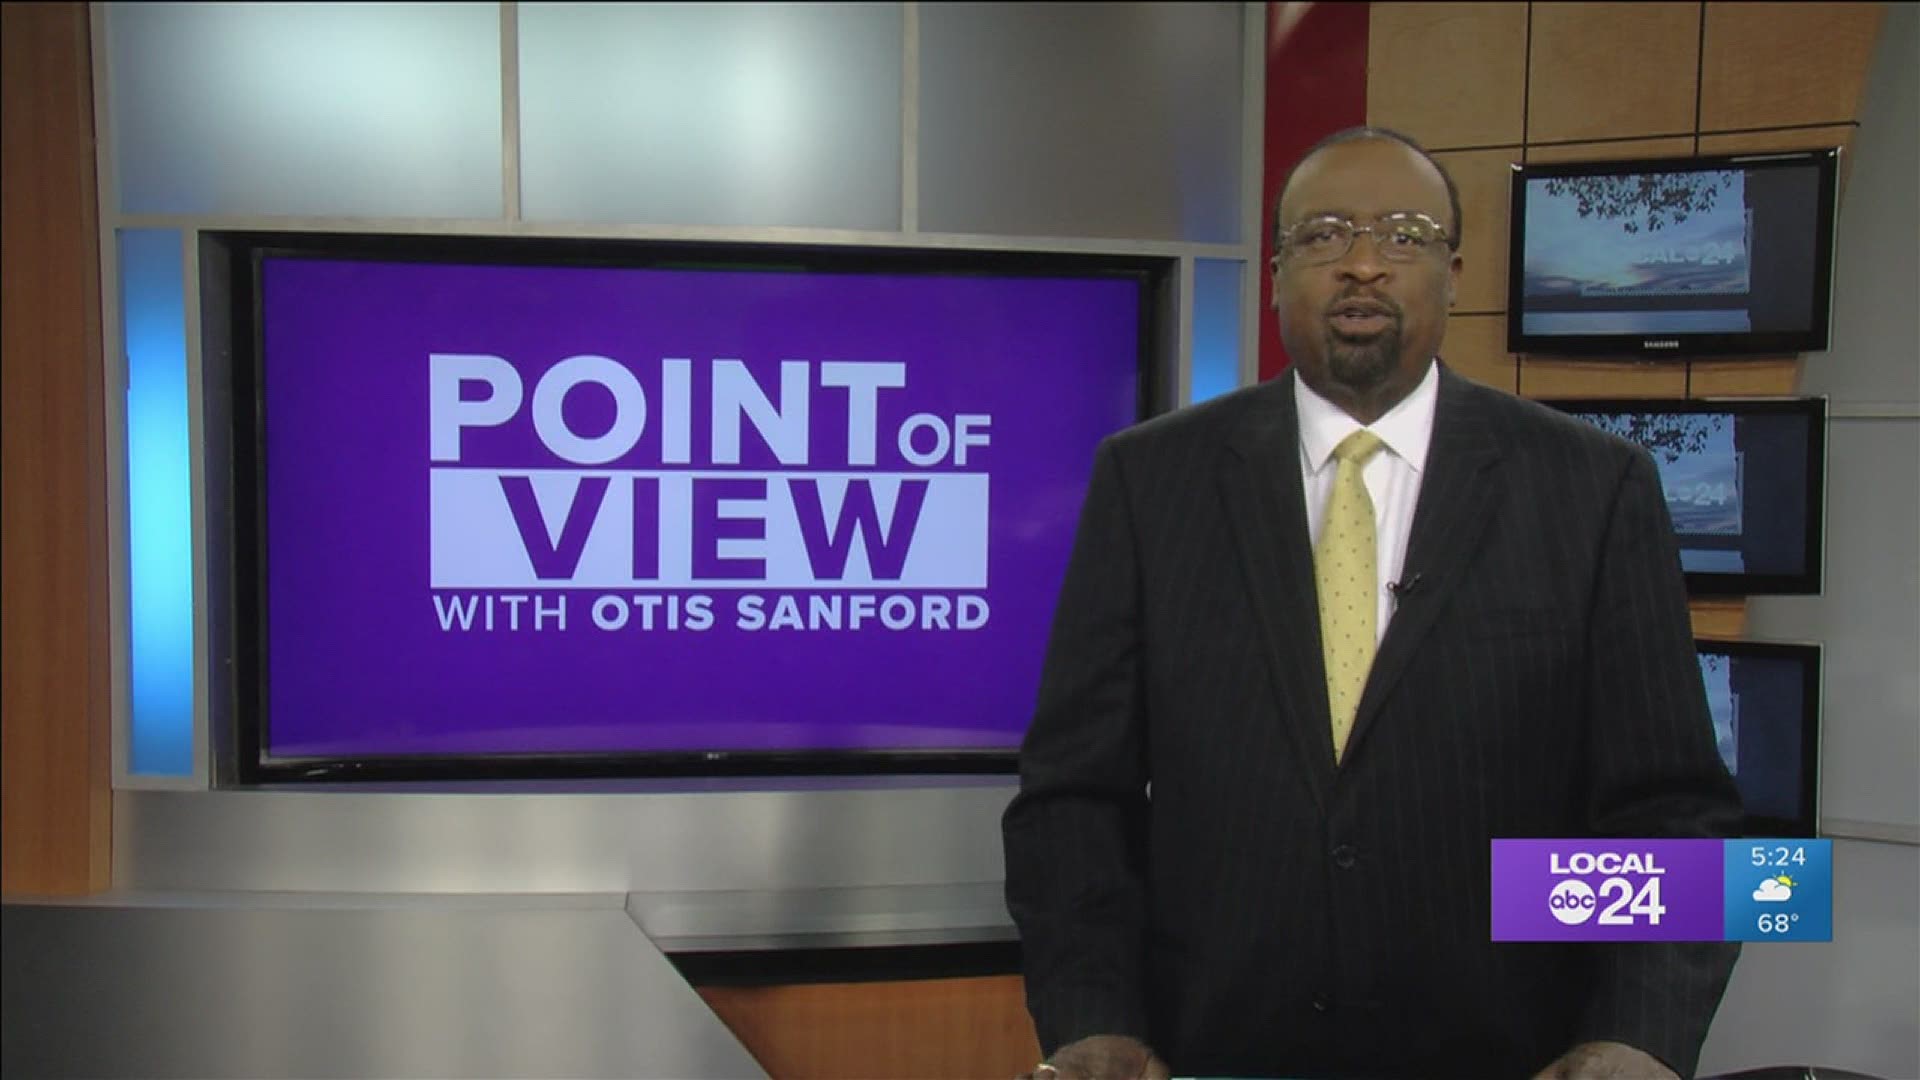 Local 24 News political analyst and commentator Otis Sanford shares his point of view on the debate over a sign in downtown Memphis.